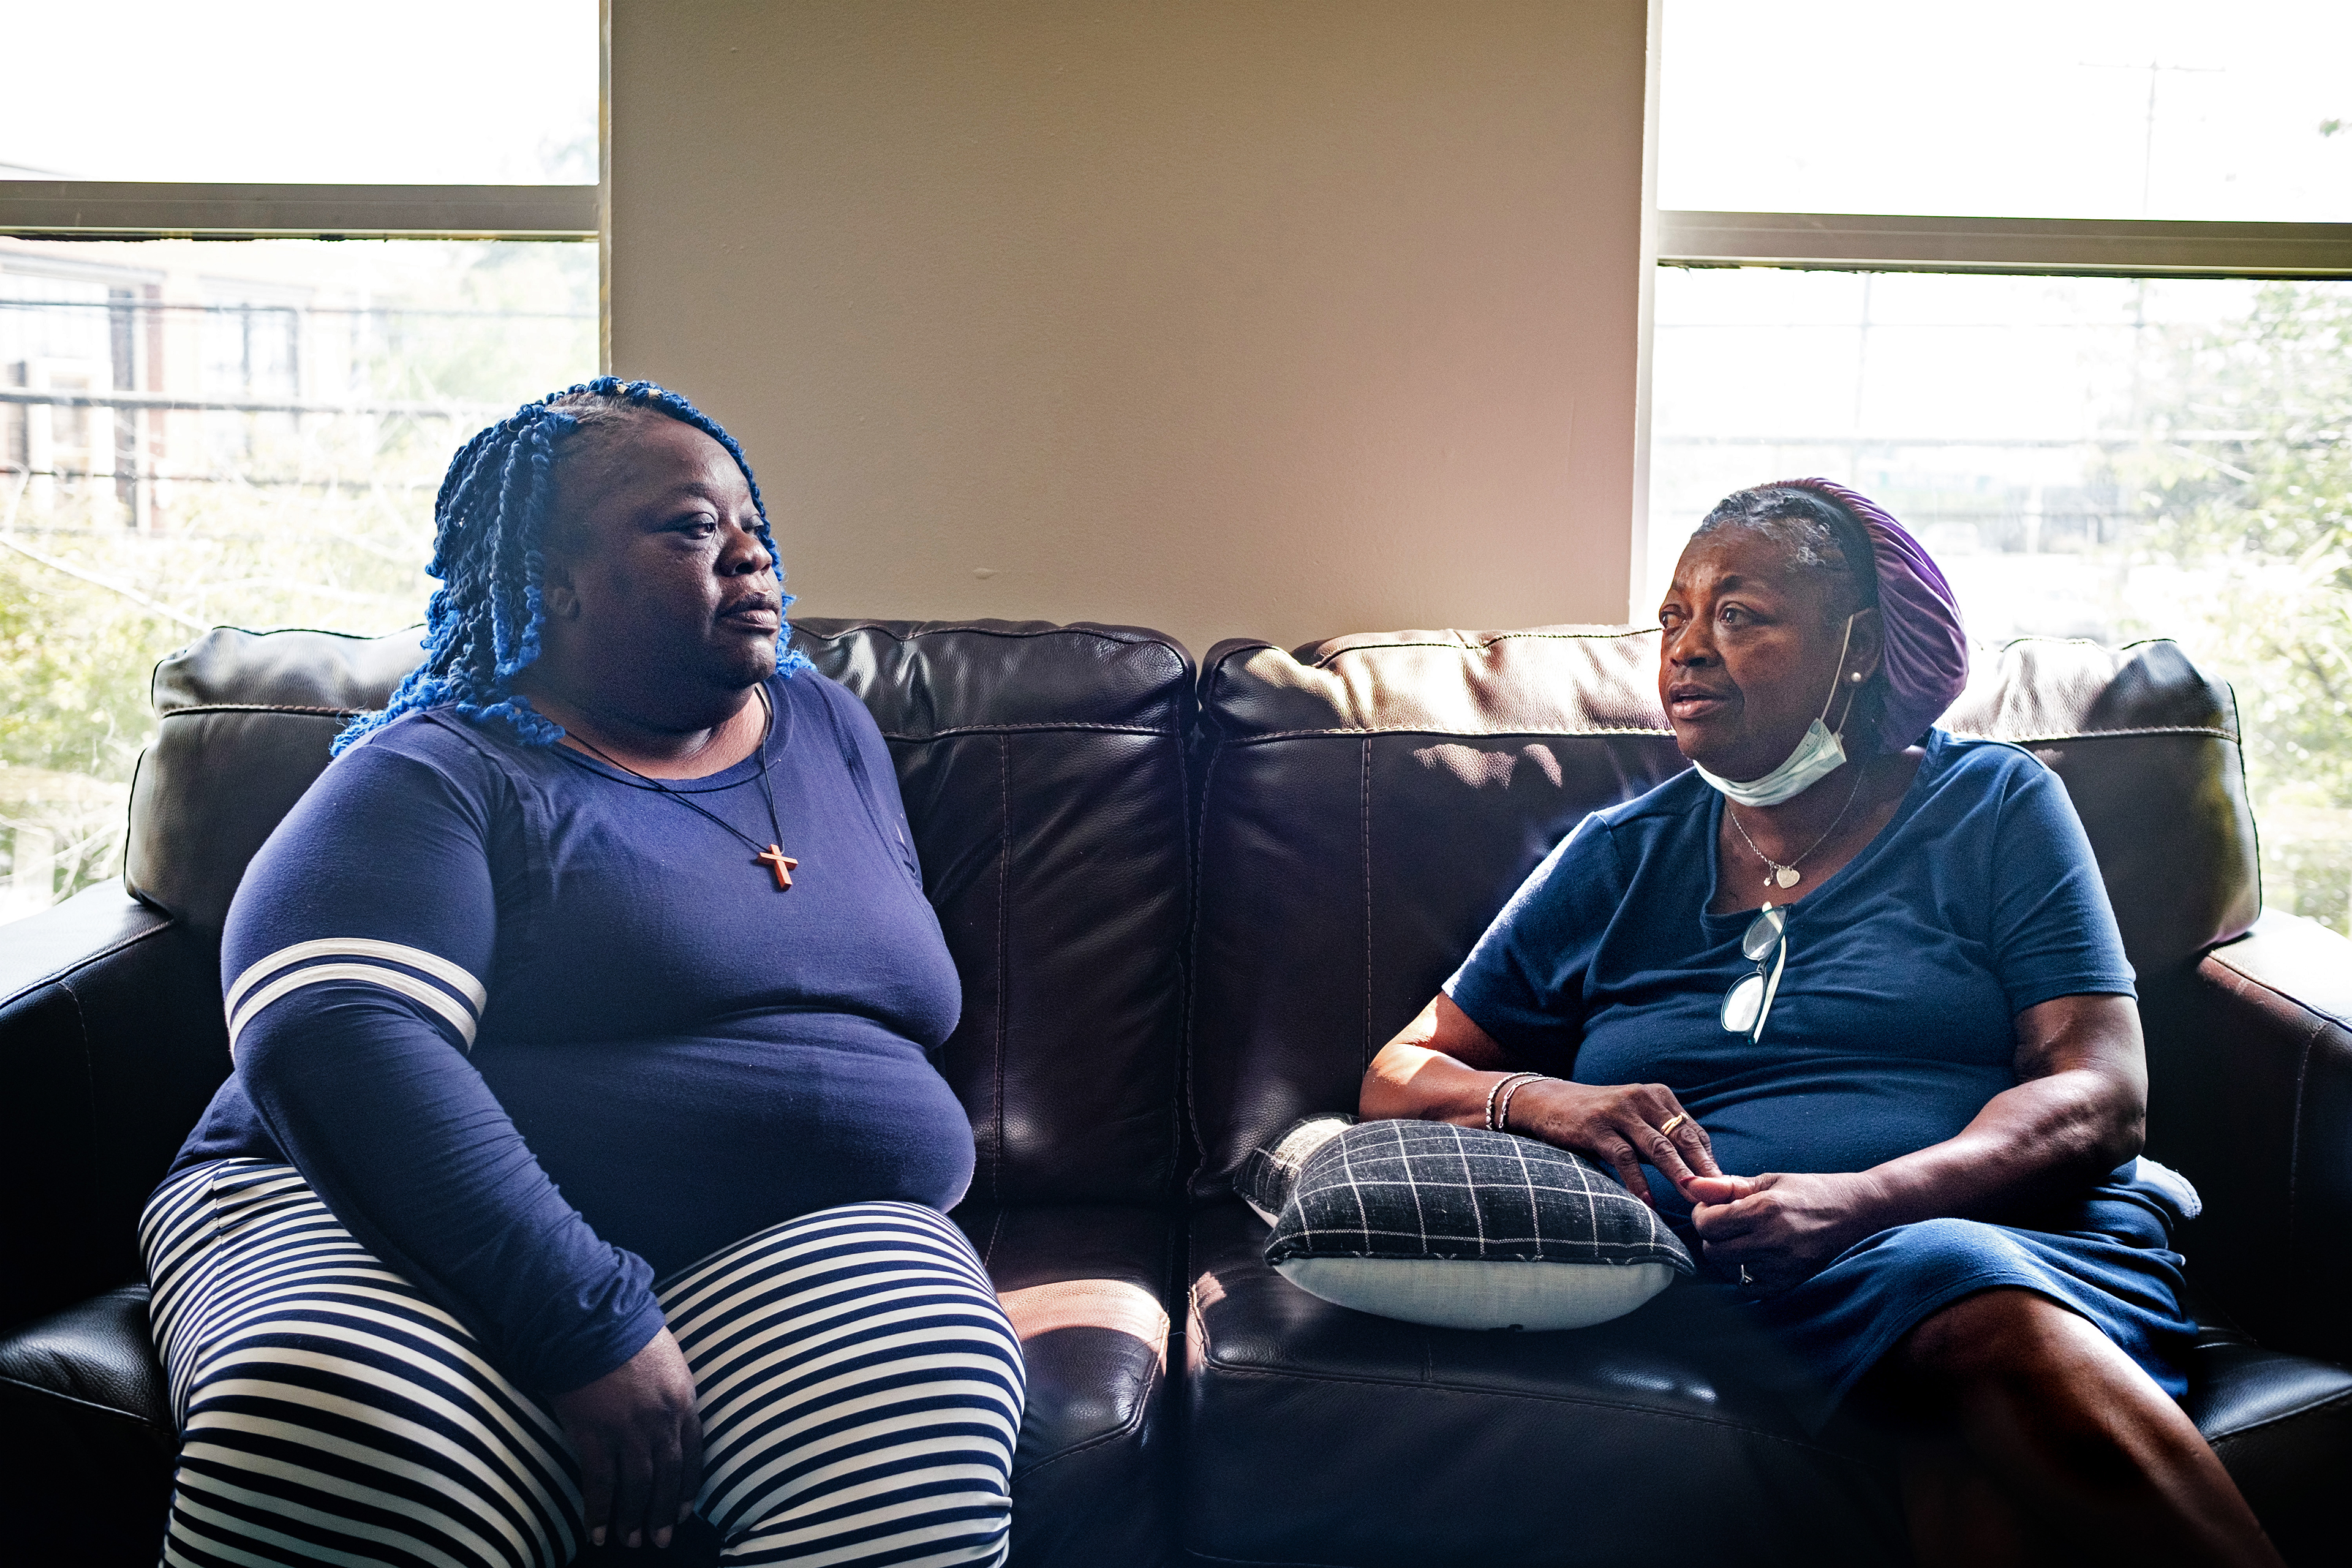 A photo shows Delisa Williams and Margaret Davis sitting on a couch in front of window, conversing.